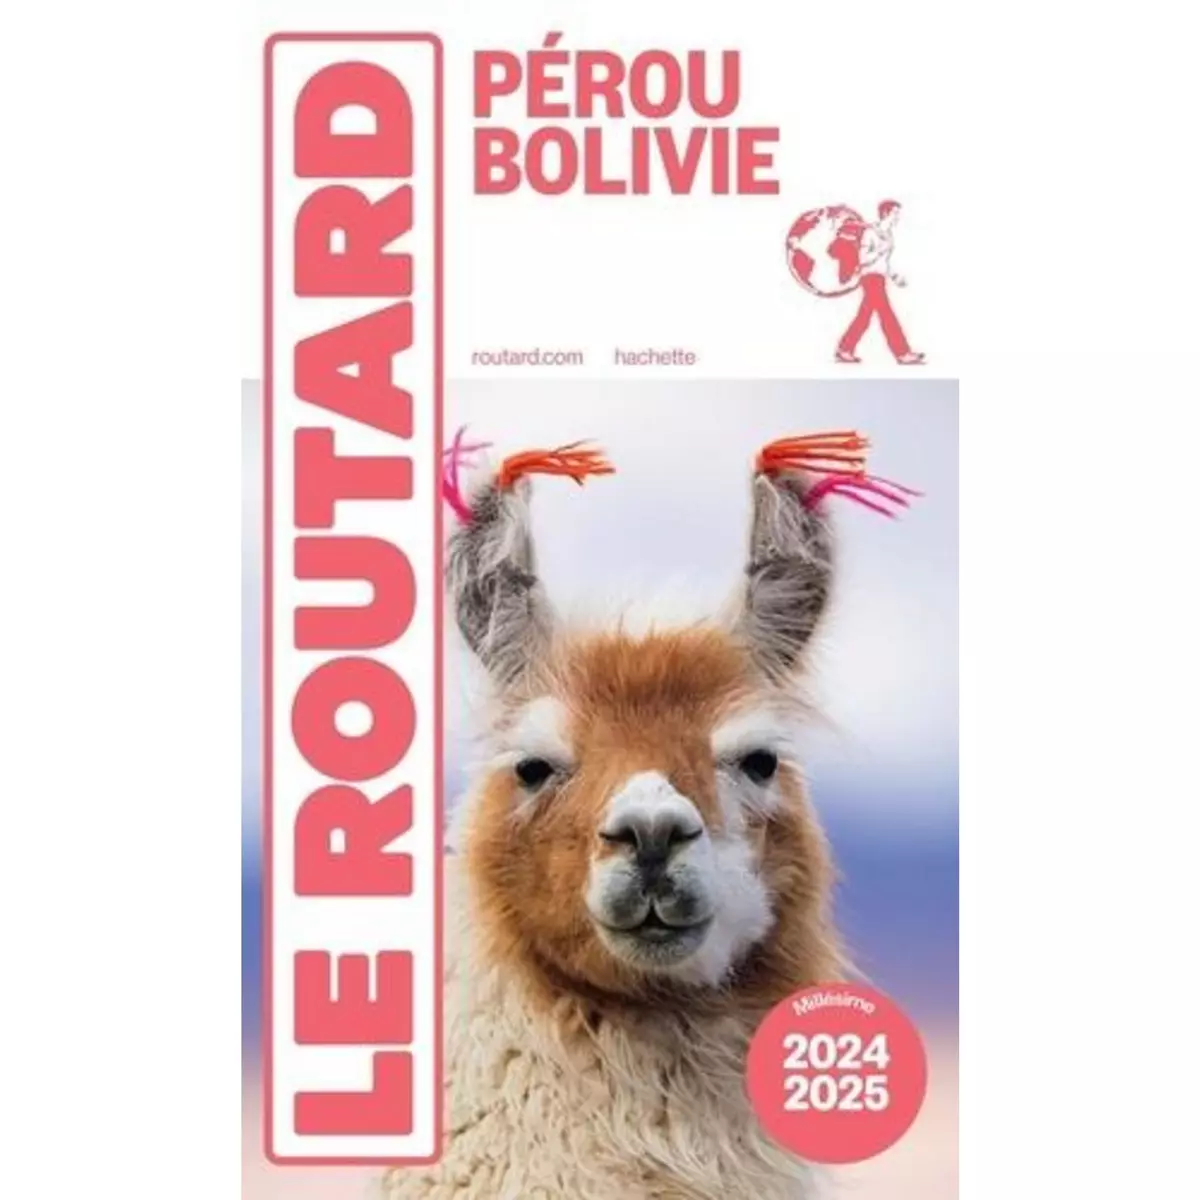  PEROU, BOLIVIE. EDITION 2024-2025, Le Routard